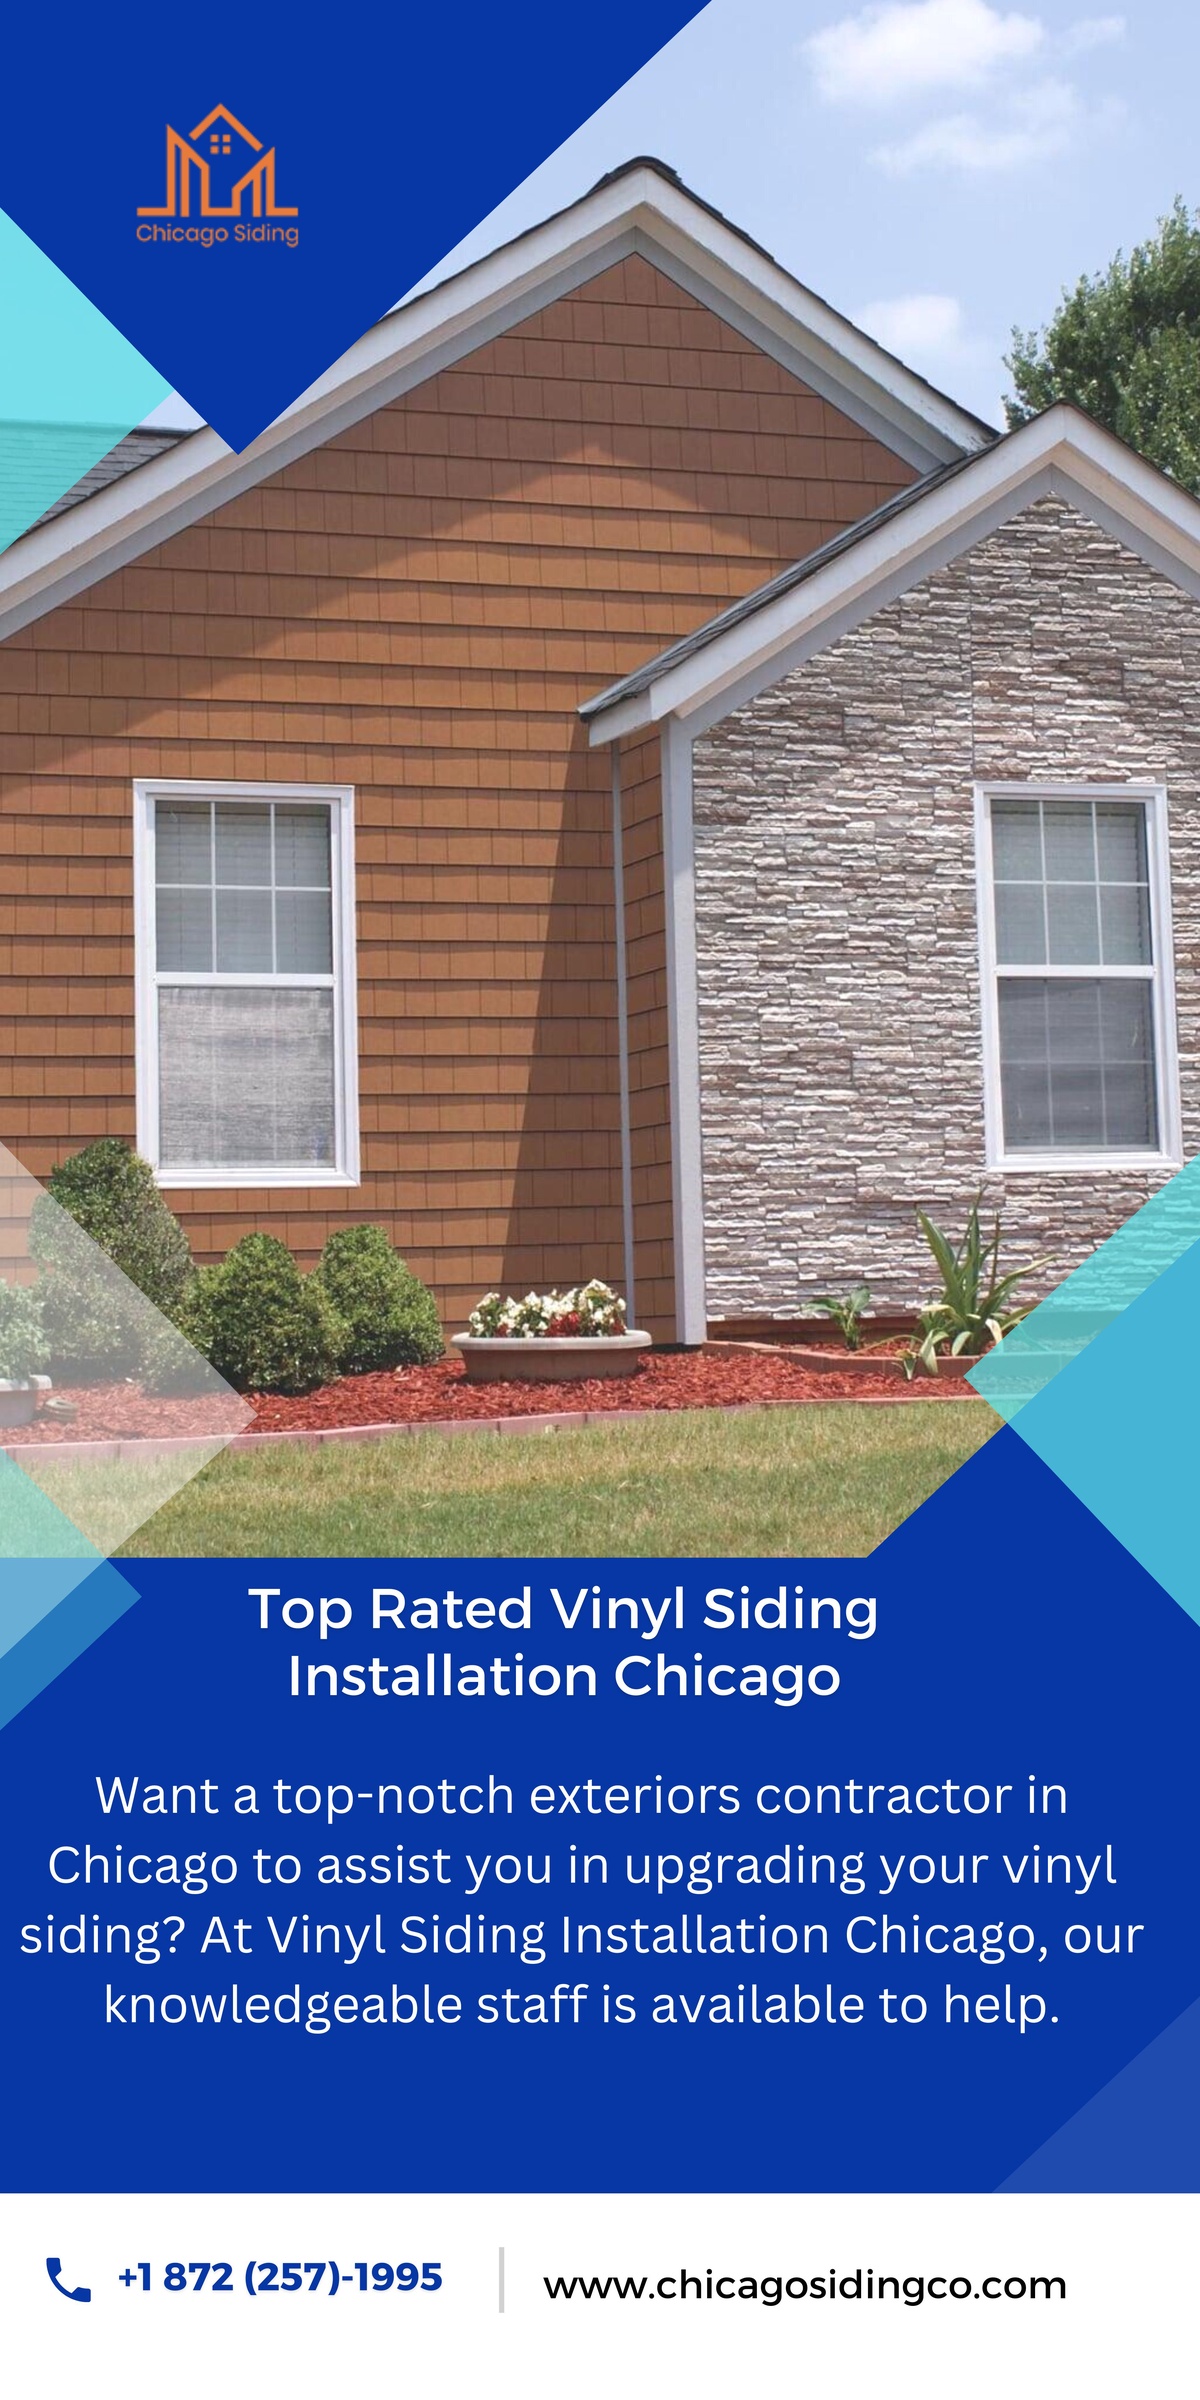 Know More About The Vinyl Siding Cost Per Square Foot